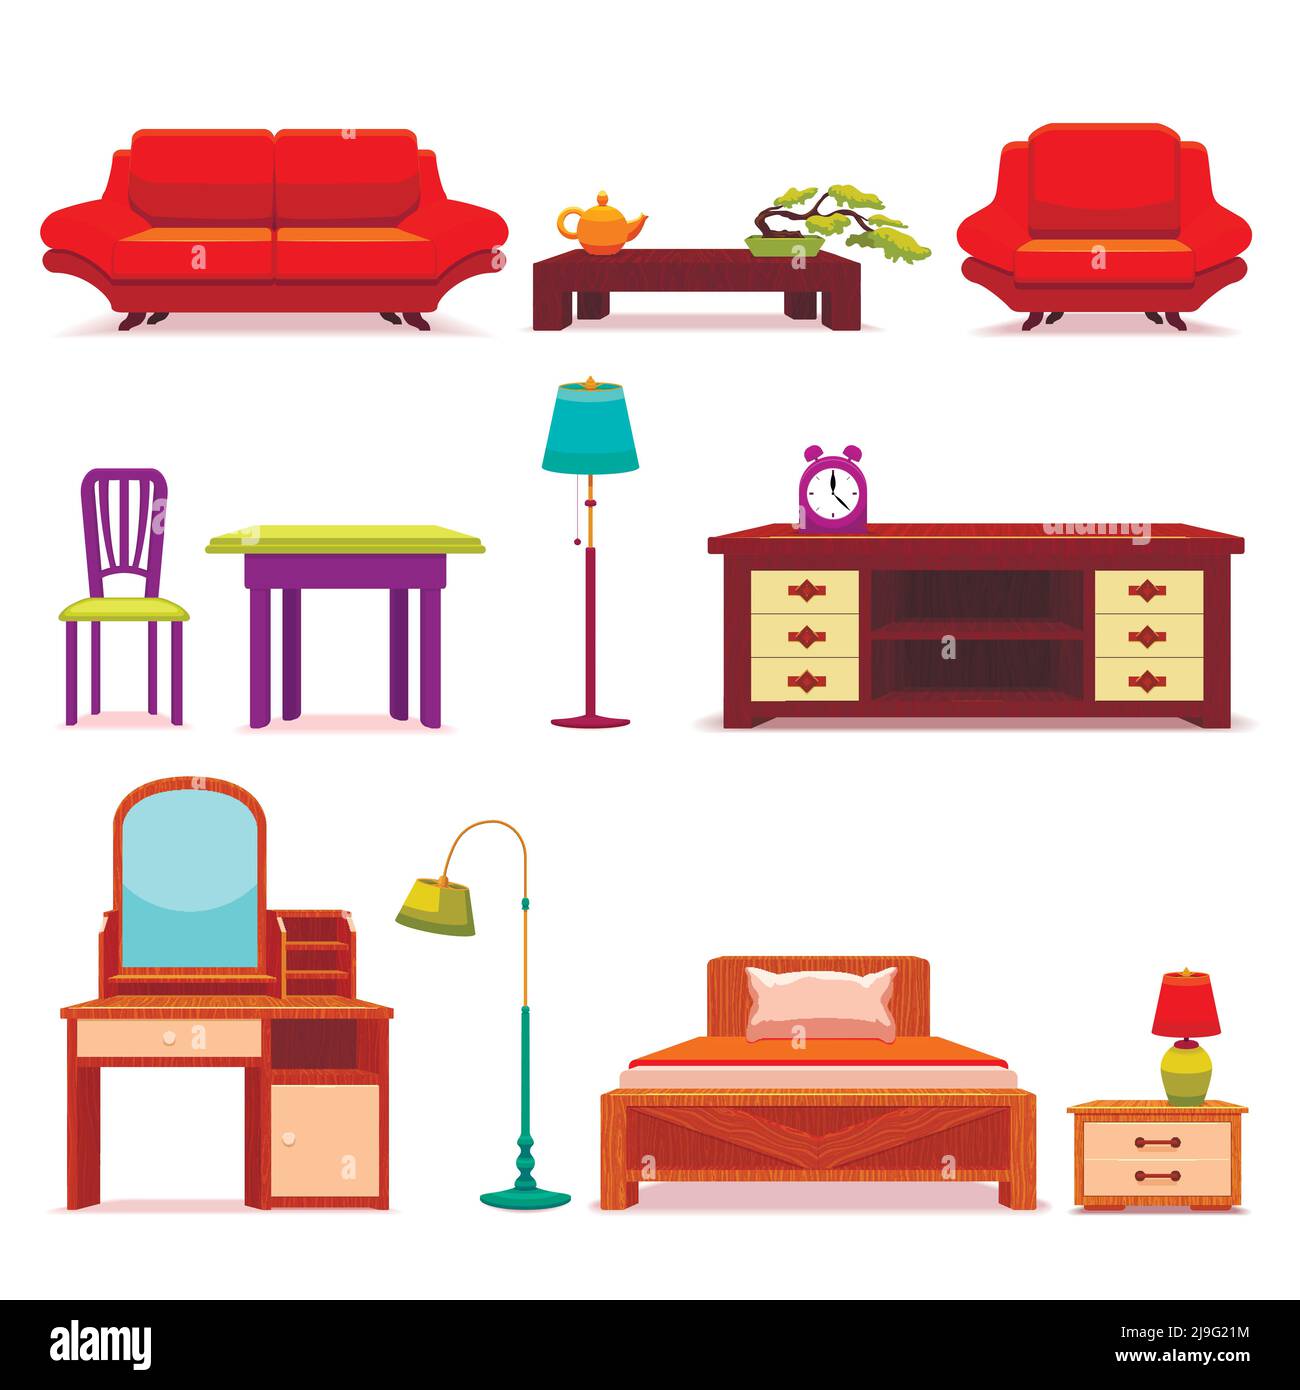 Hotel furniture set with sofa and coffee table vanity and wooden bed floor lamps isolated vector illustration Stock Vector